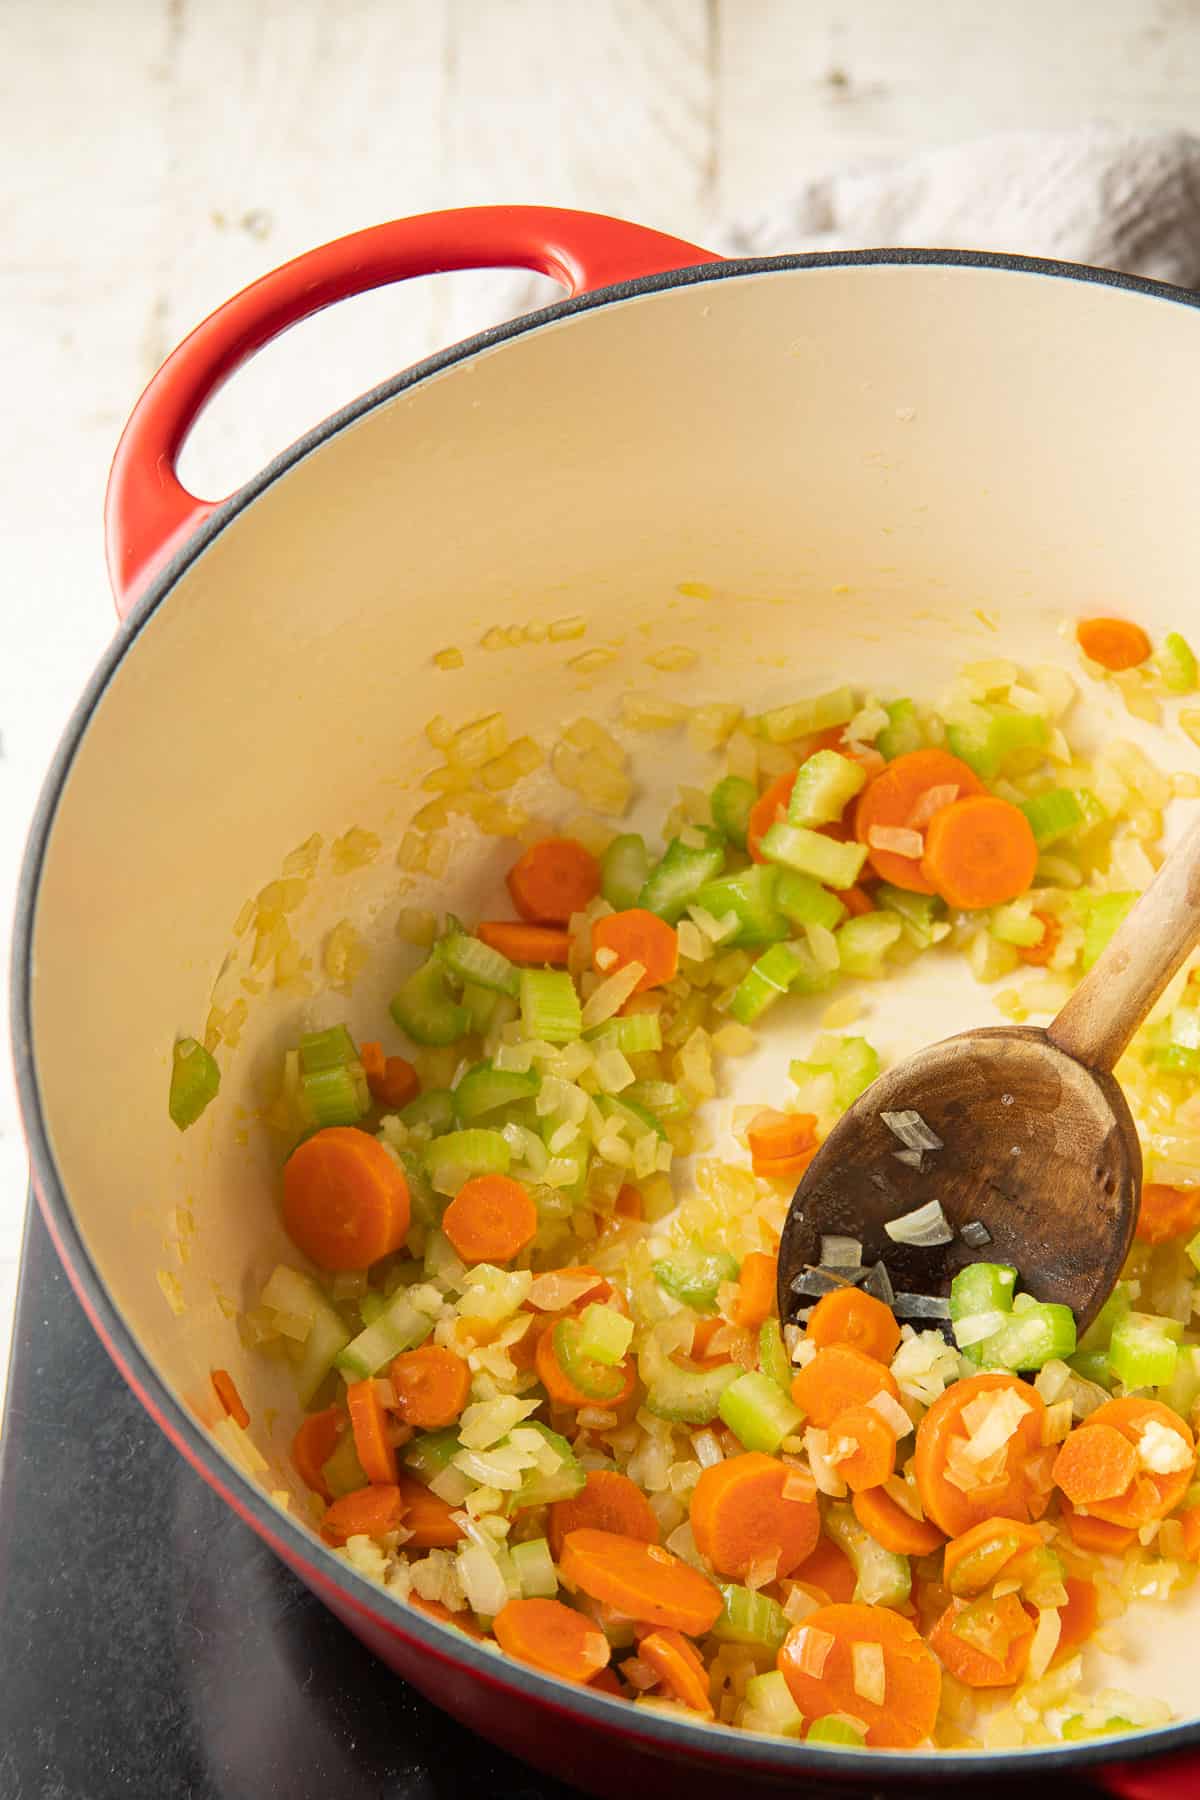 Onions, carrots, and celery cooking in a pot with a wooden spoon.